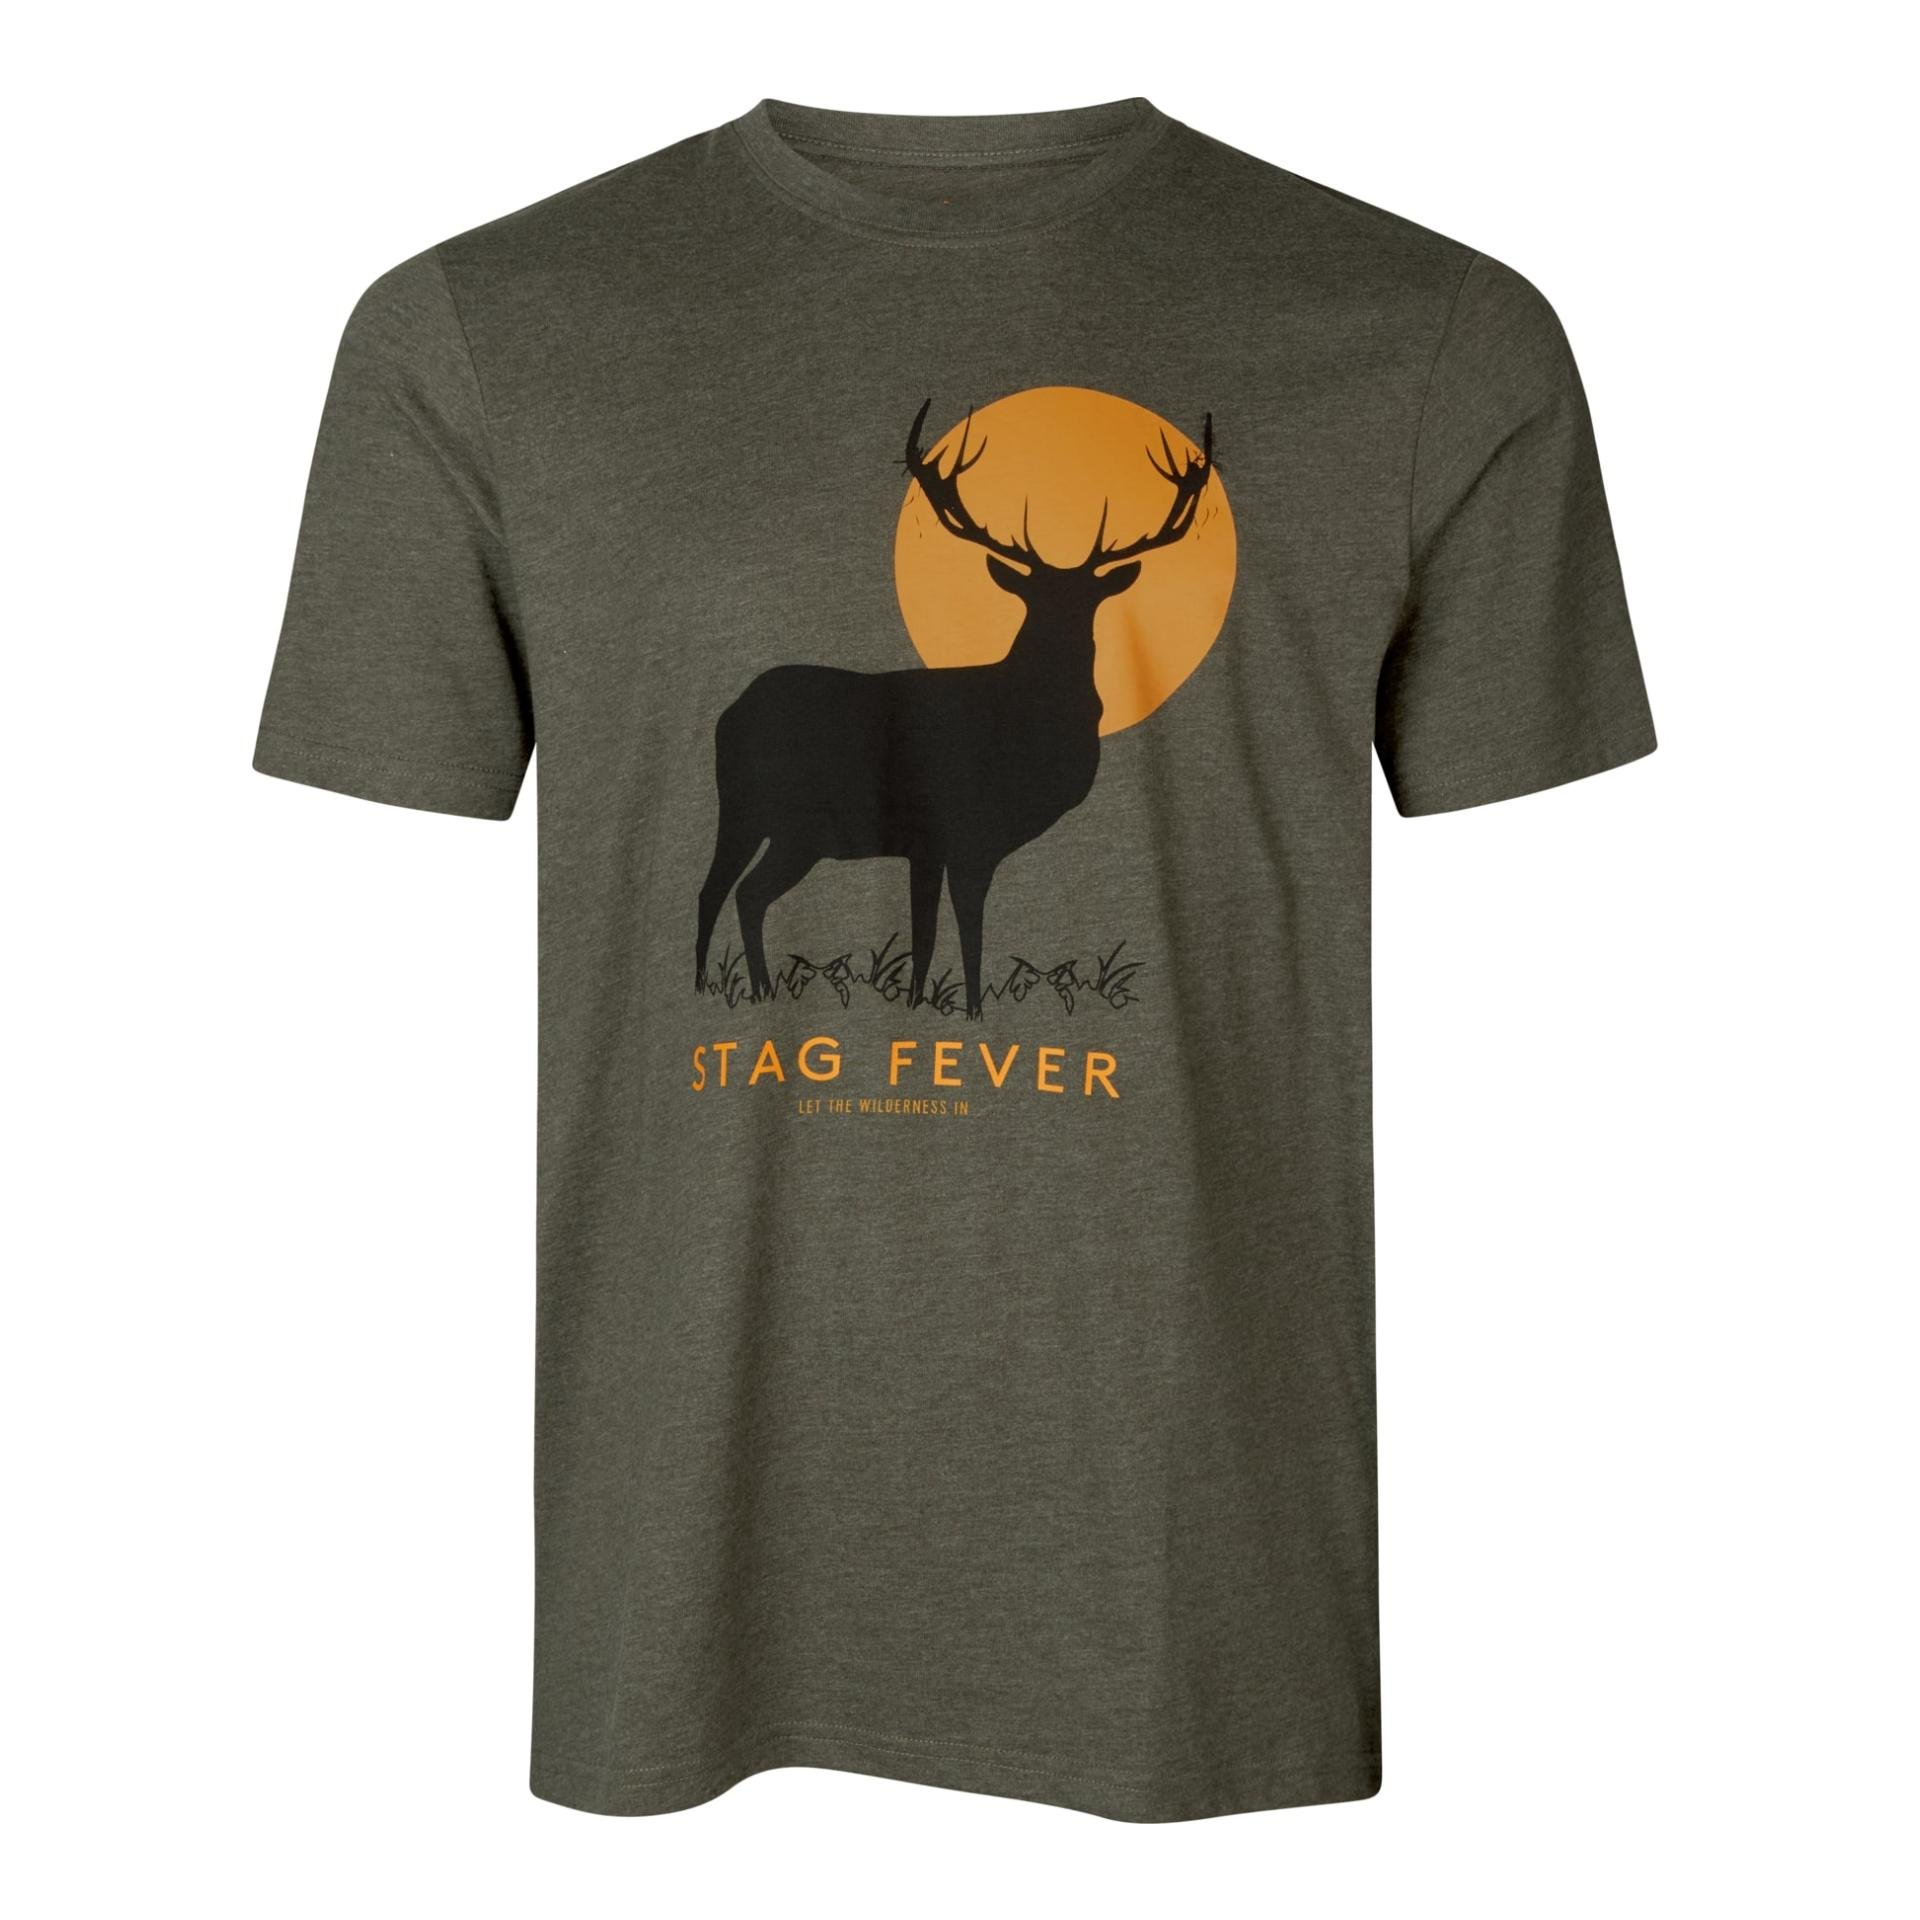 Seeland Stag Fever T-shirt